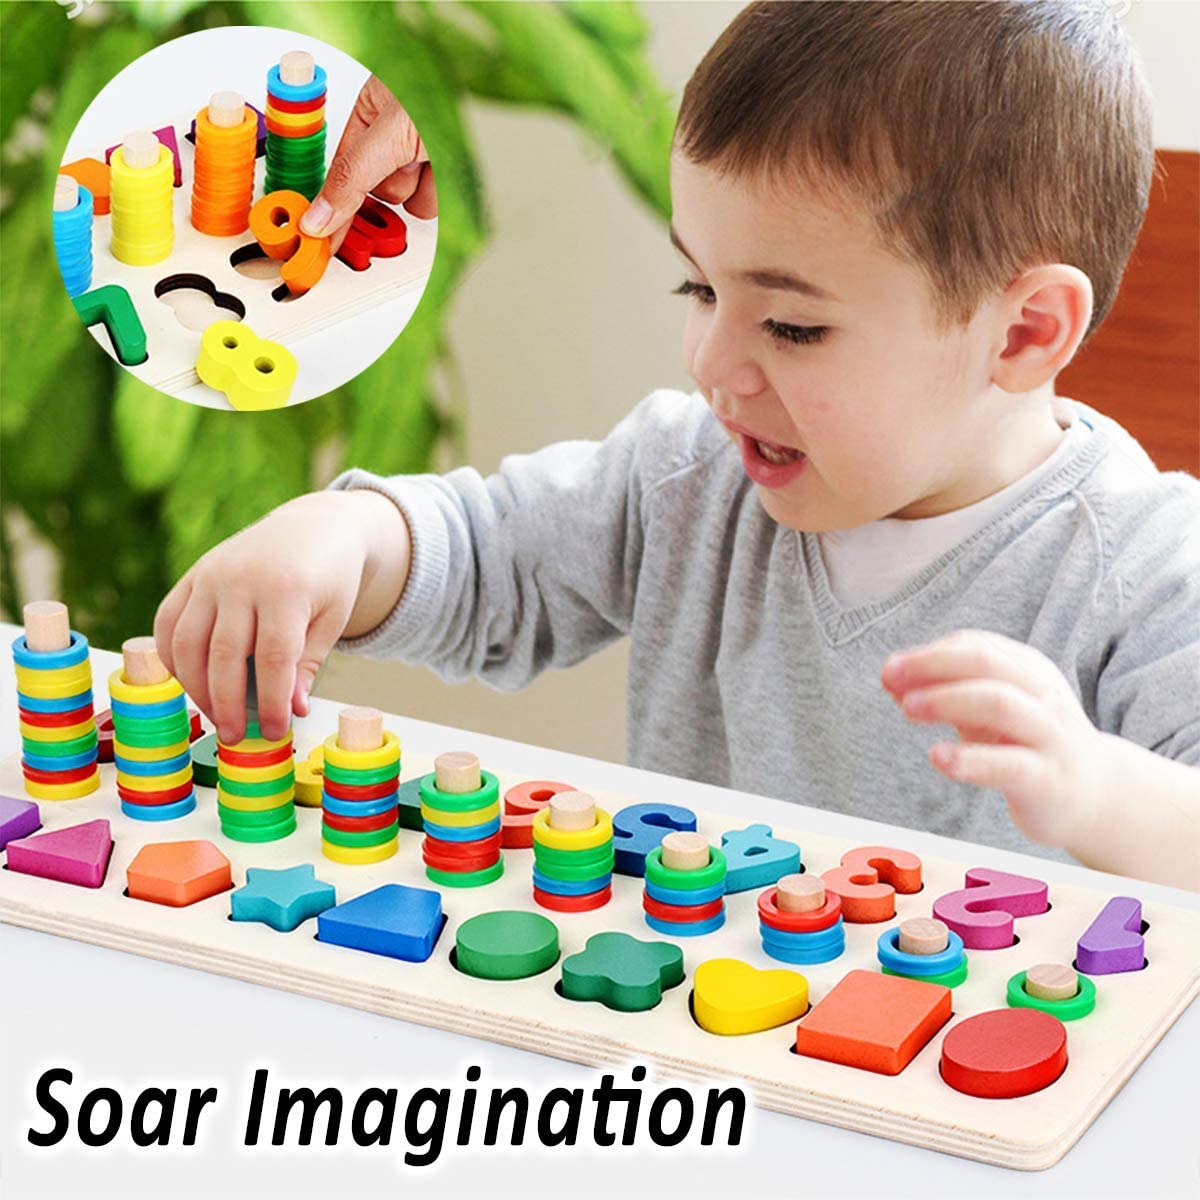 Educational Montessori Toys for Toddlers - Wooden Puzzles Blocks Number Stacking Best Preschool Learning Activities Shape sorter Math Game Baby Kids Girls Boys Ages 3 4 5 Years Old | MTTS158